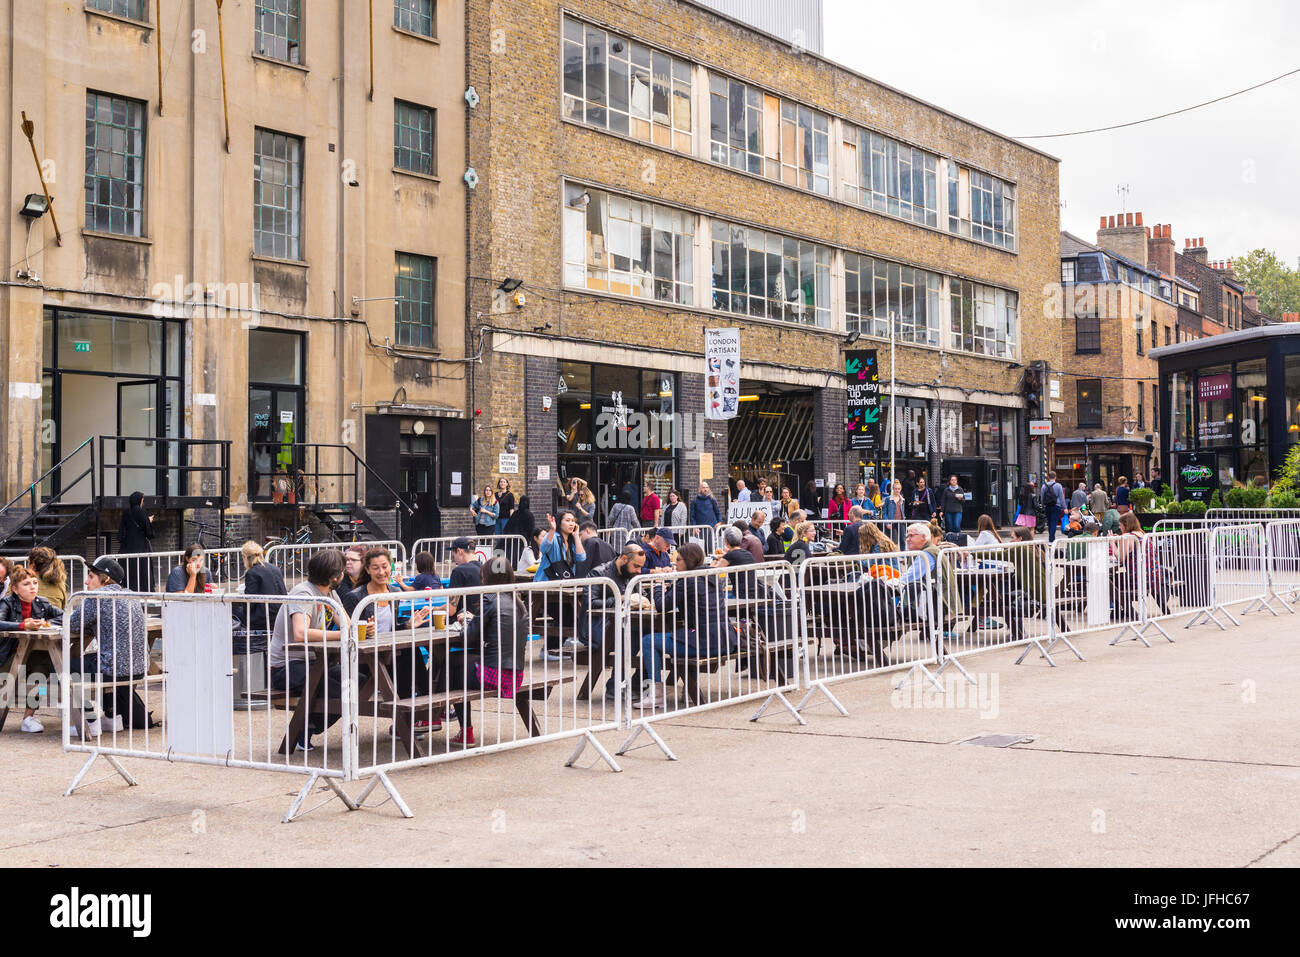 London, England - September 2016: Pop up Outdoor food area with people eating outiside at The Old Truman Brewery, Ely's Yard, Shoreditch, London, UK Stock Photo